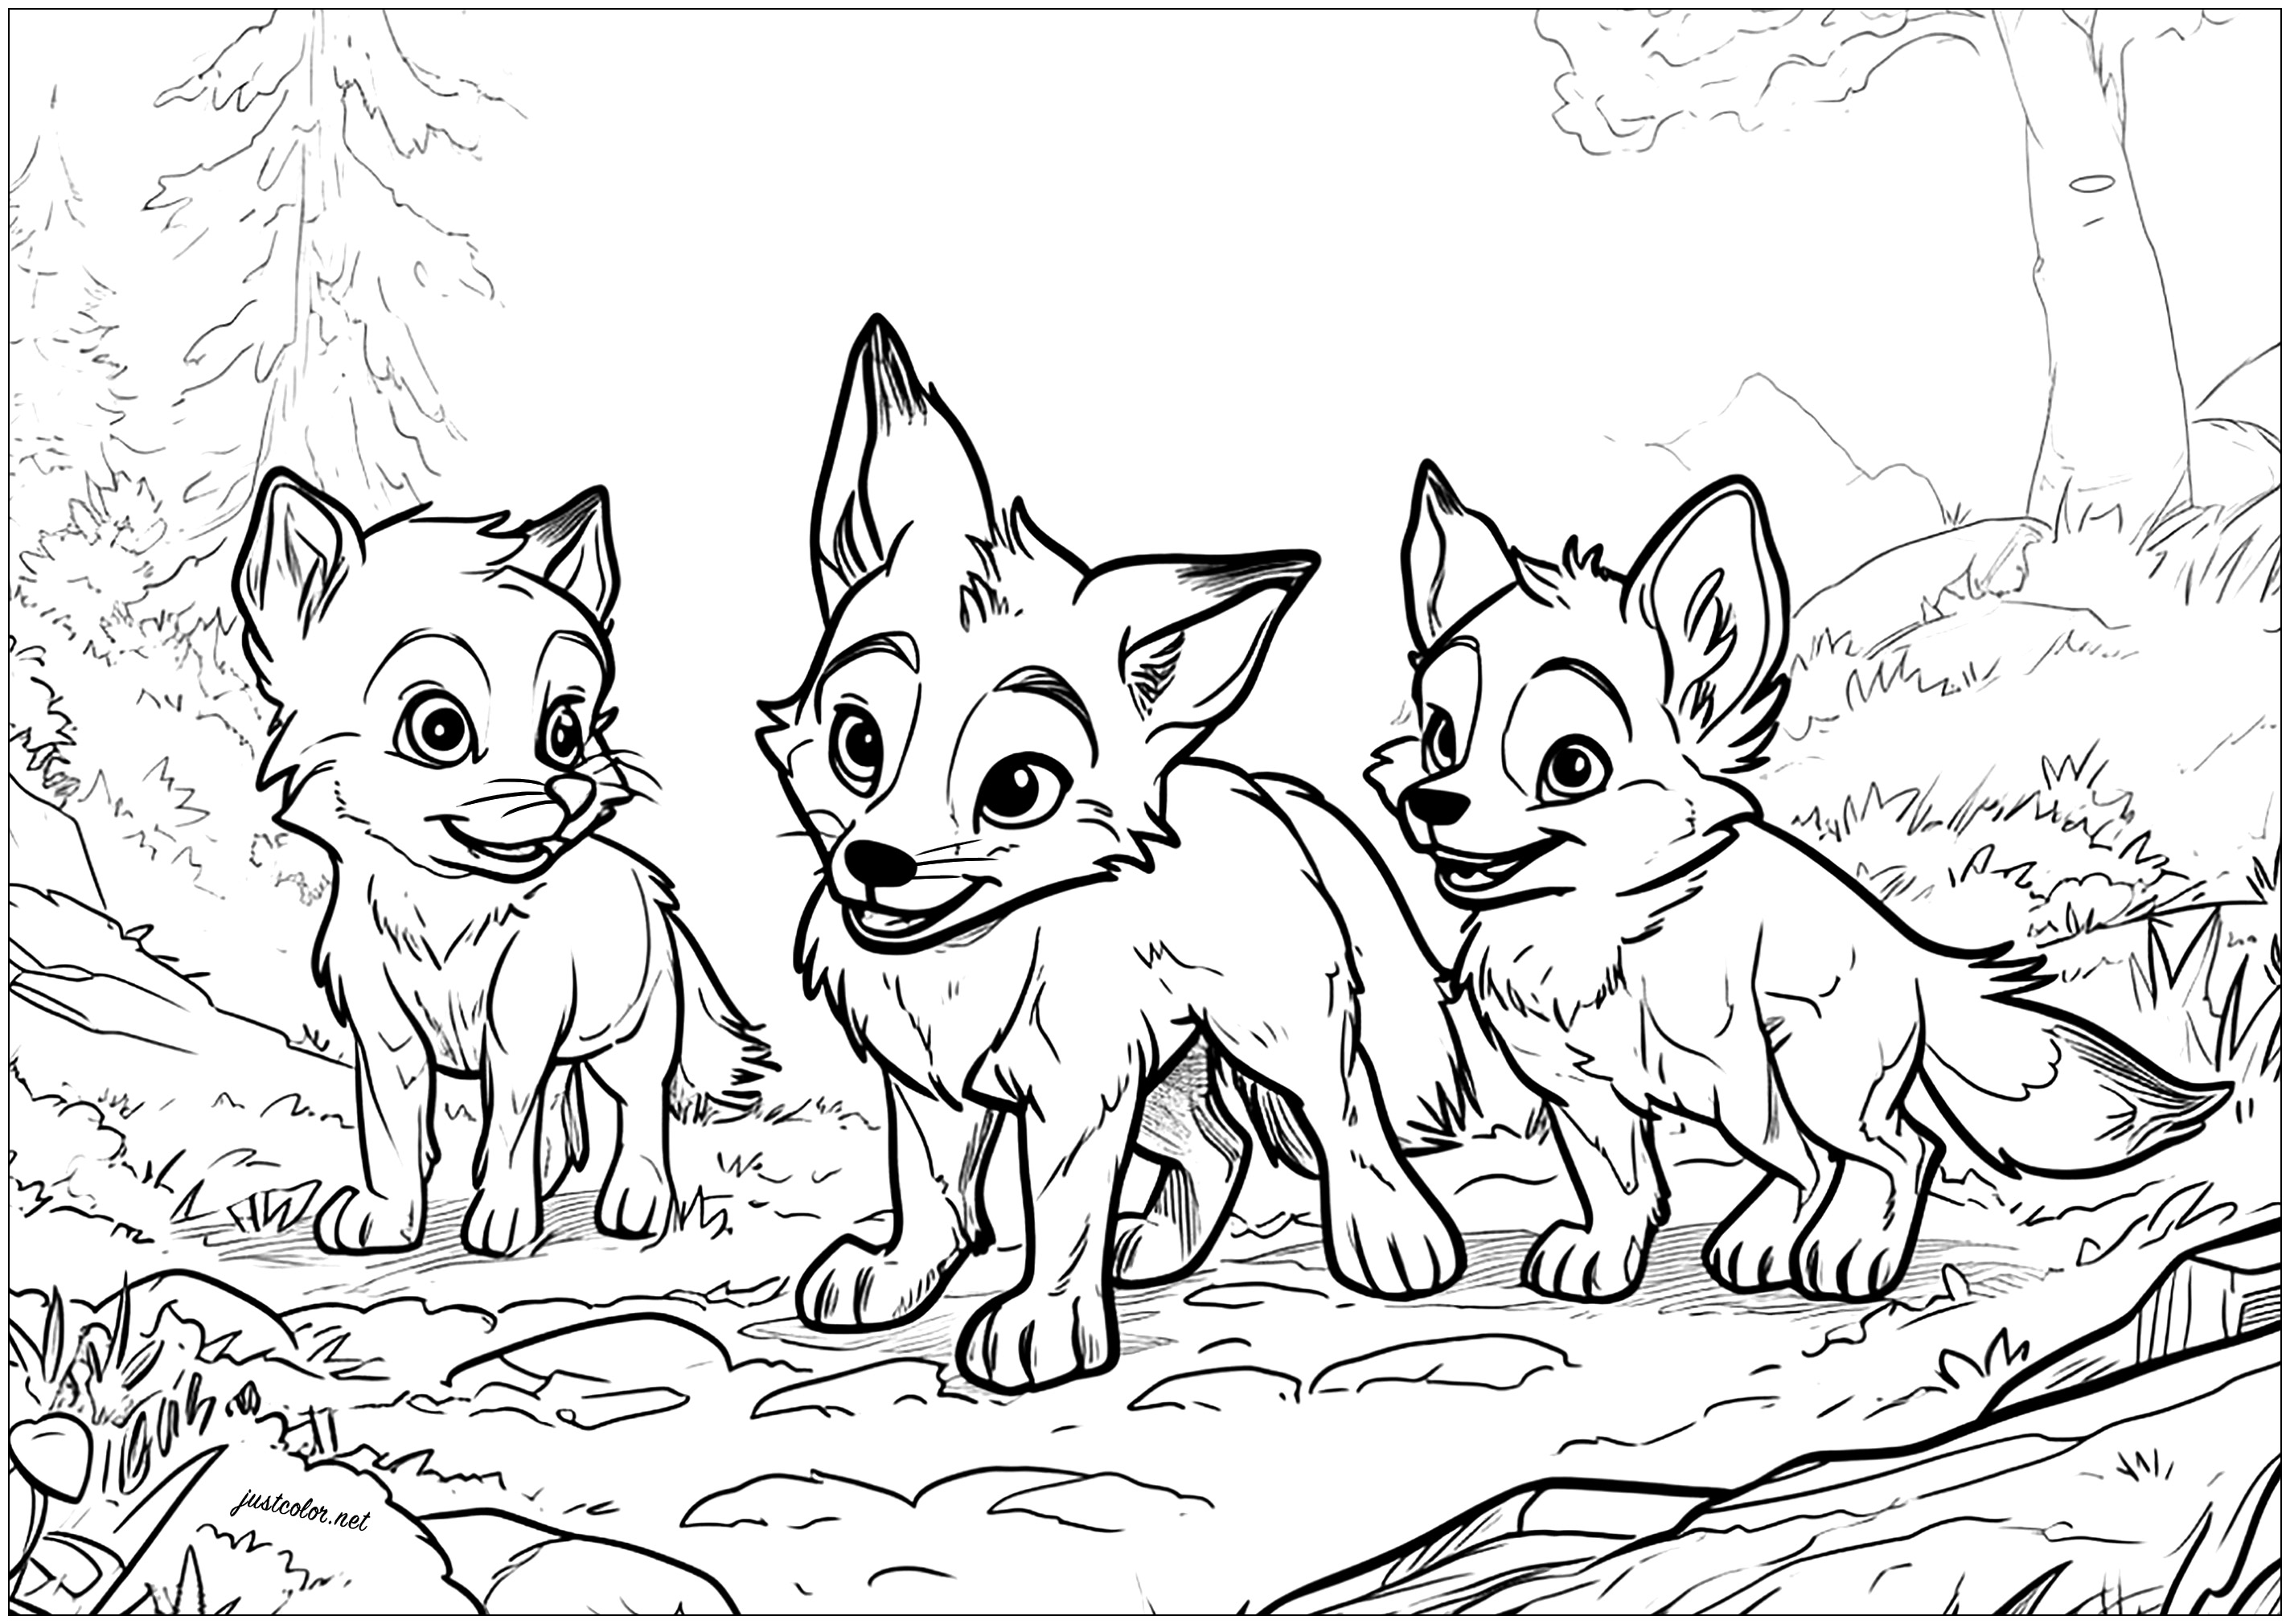 Three young foxes in the forest